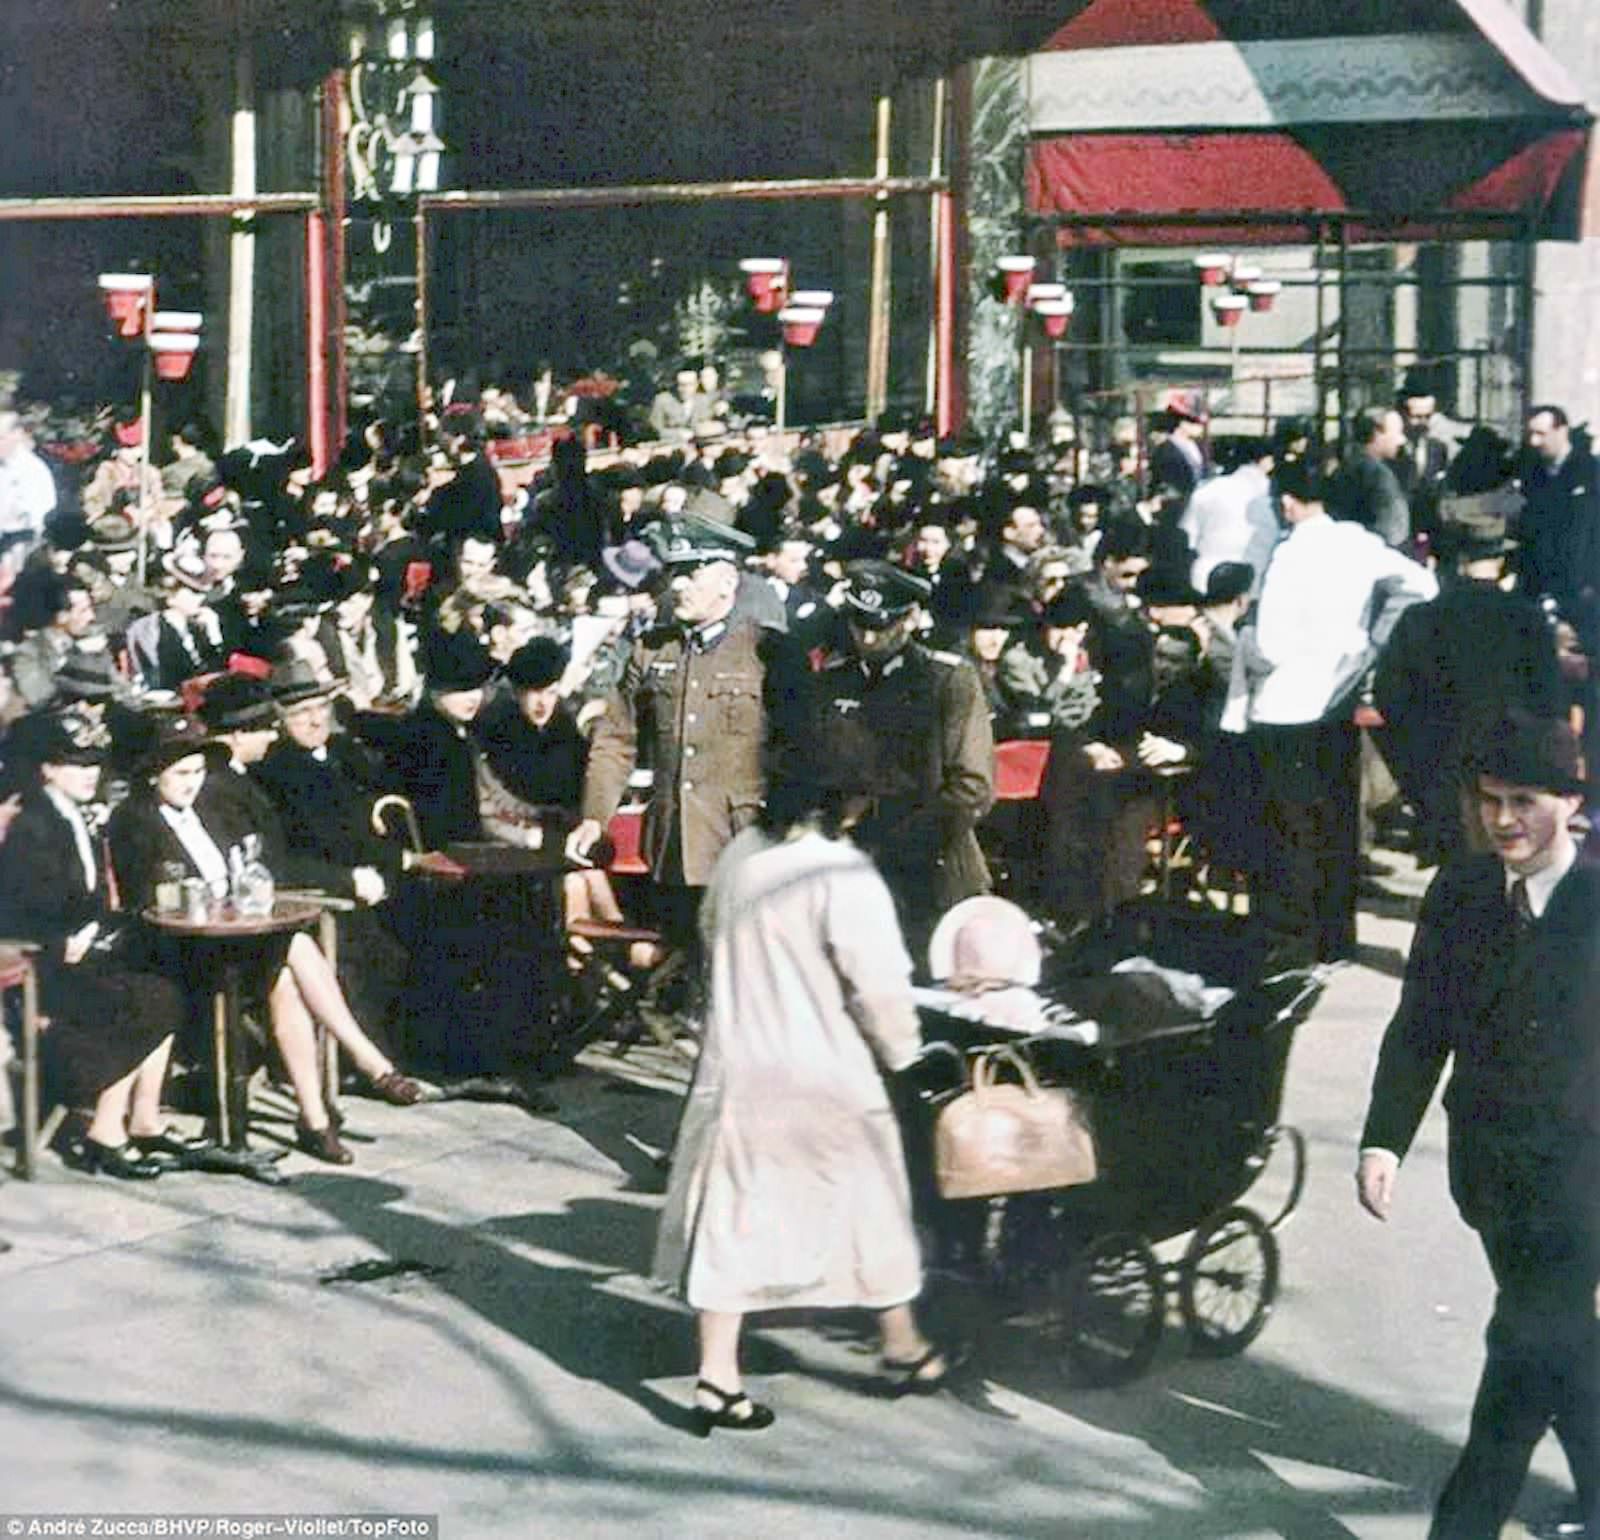 Senior-looking German army officers stroll past a crowd of French enjoying the afternoon in one of Paris’s outdoor cafés.